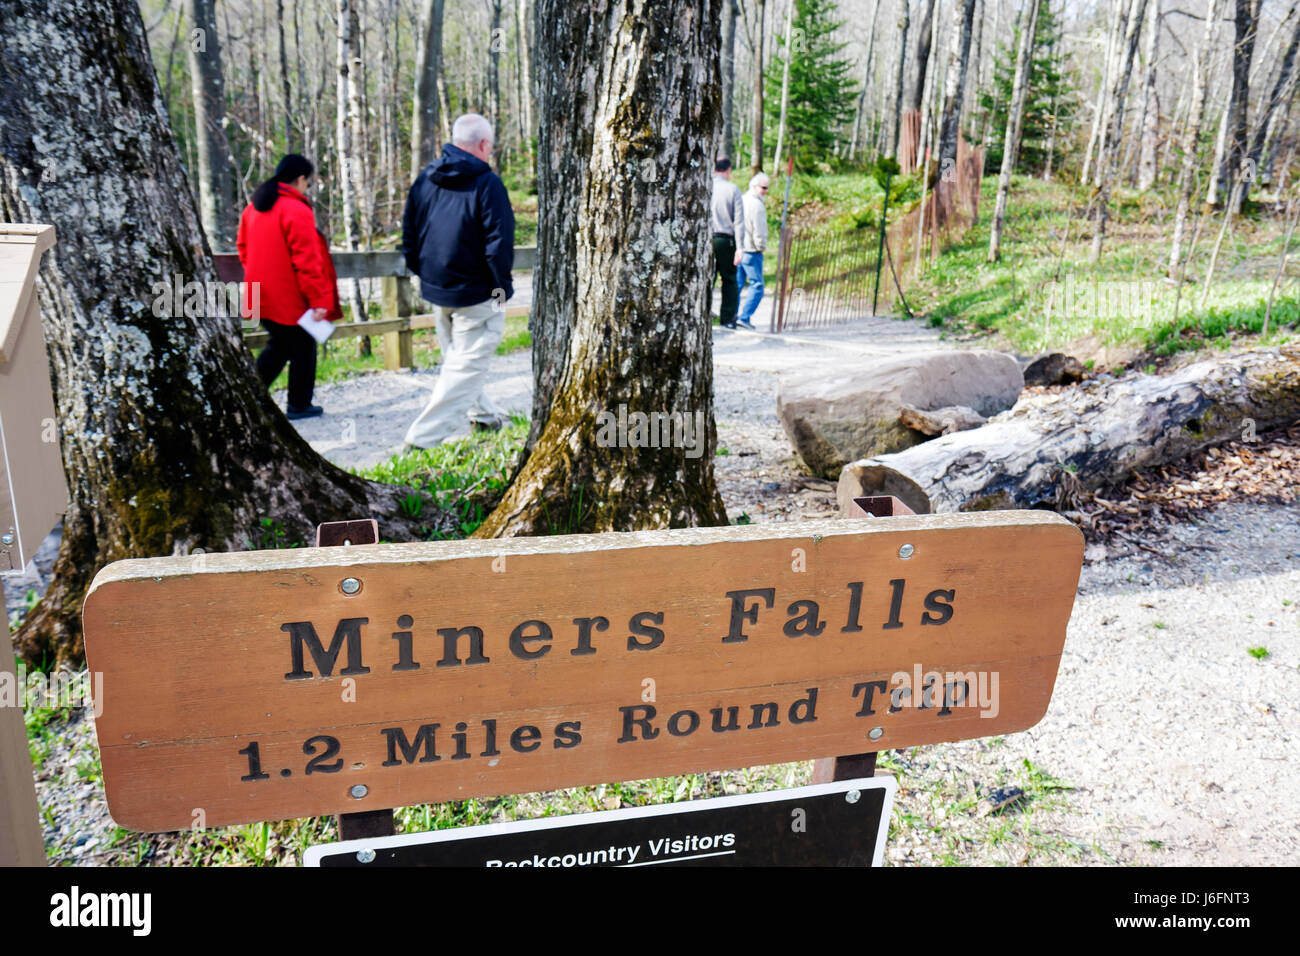 Michigan Upper Peninsula,U.P.,UP,Lake Superior,Pictured Rocks National Lakeshore,Miners Falls Trail,Great Lakes,Early Spring,sign,logo,direction,Europa Foto Stock